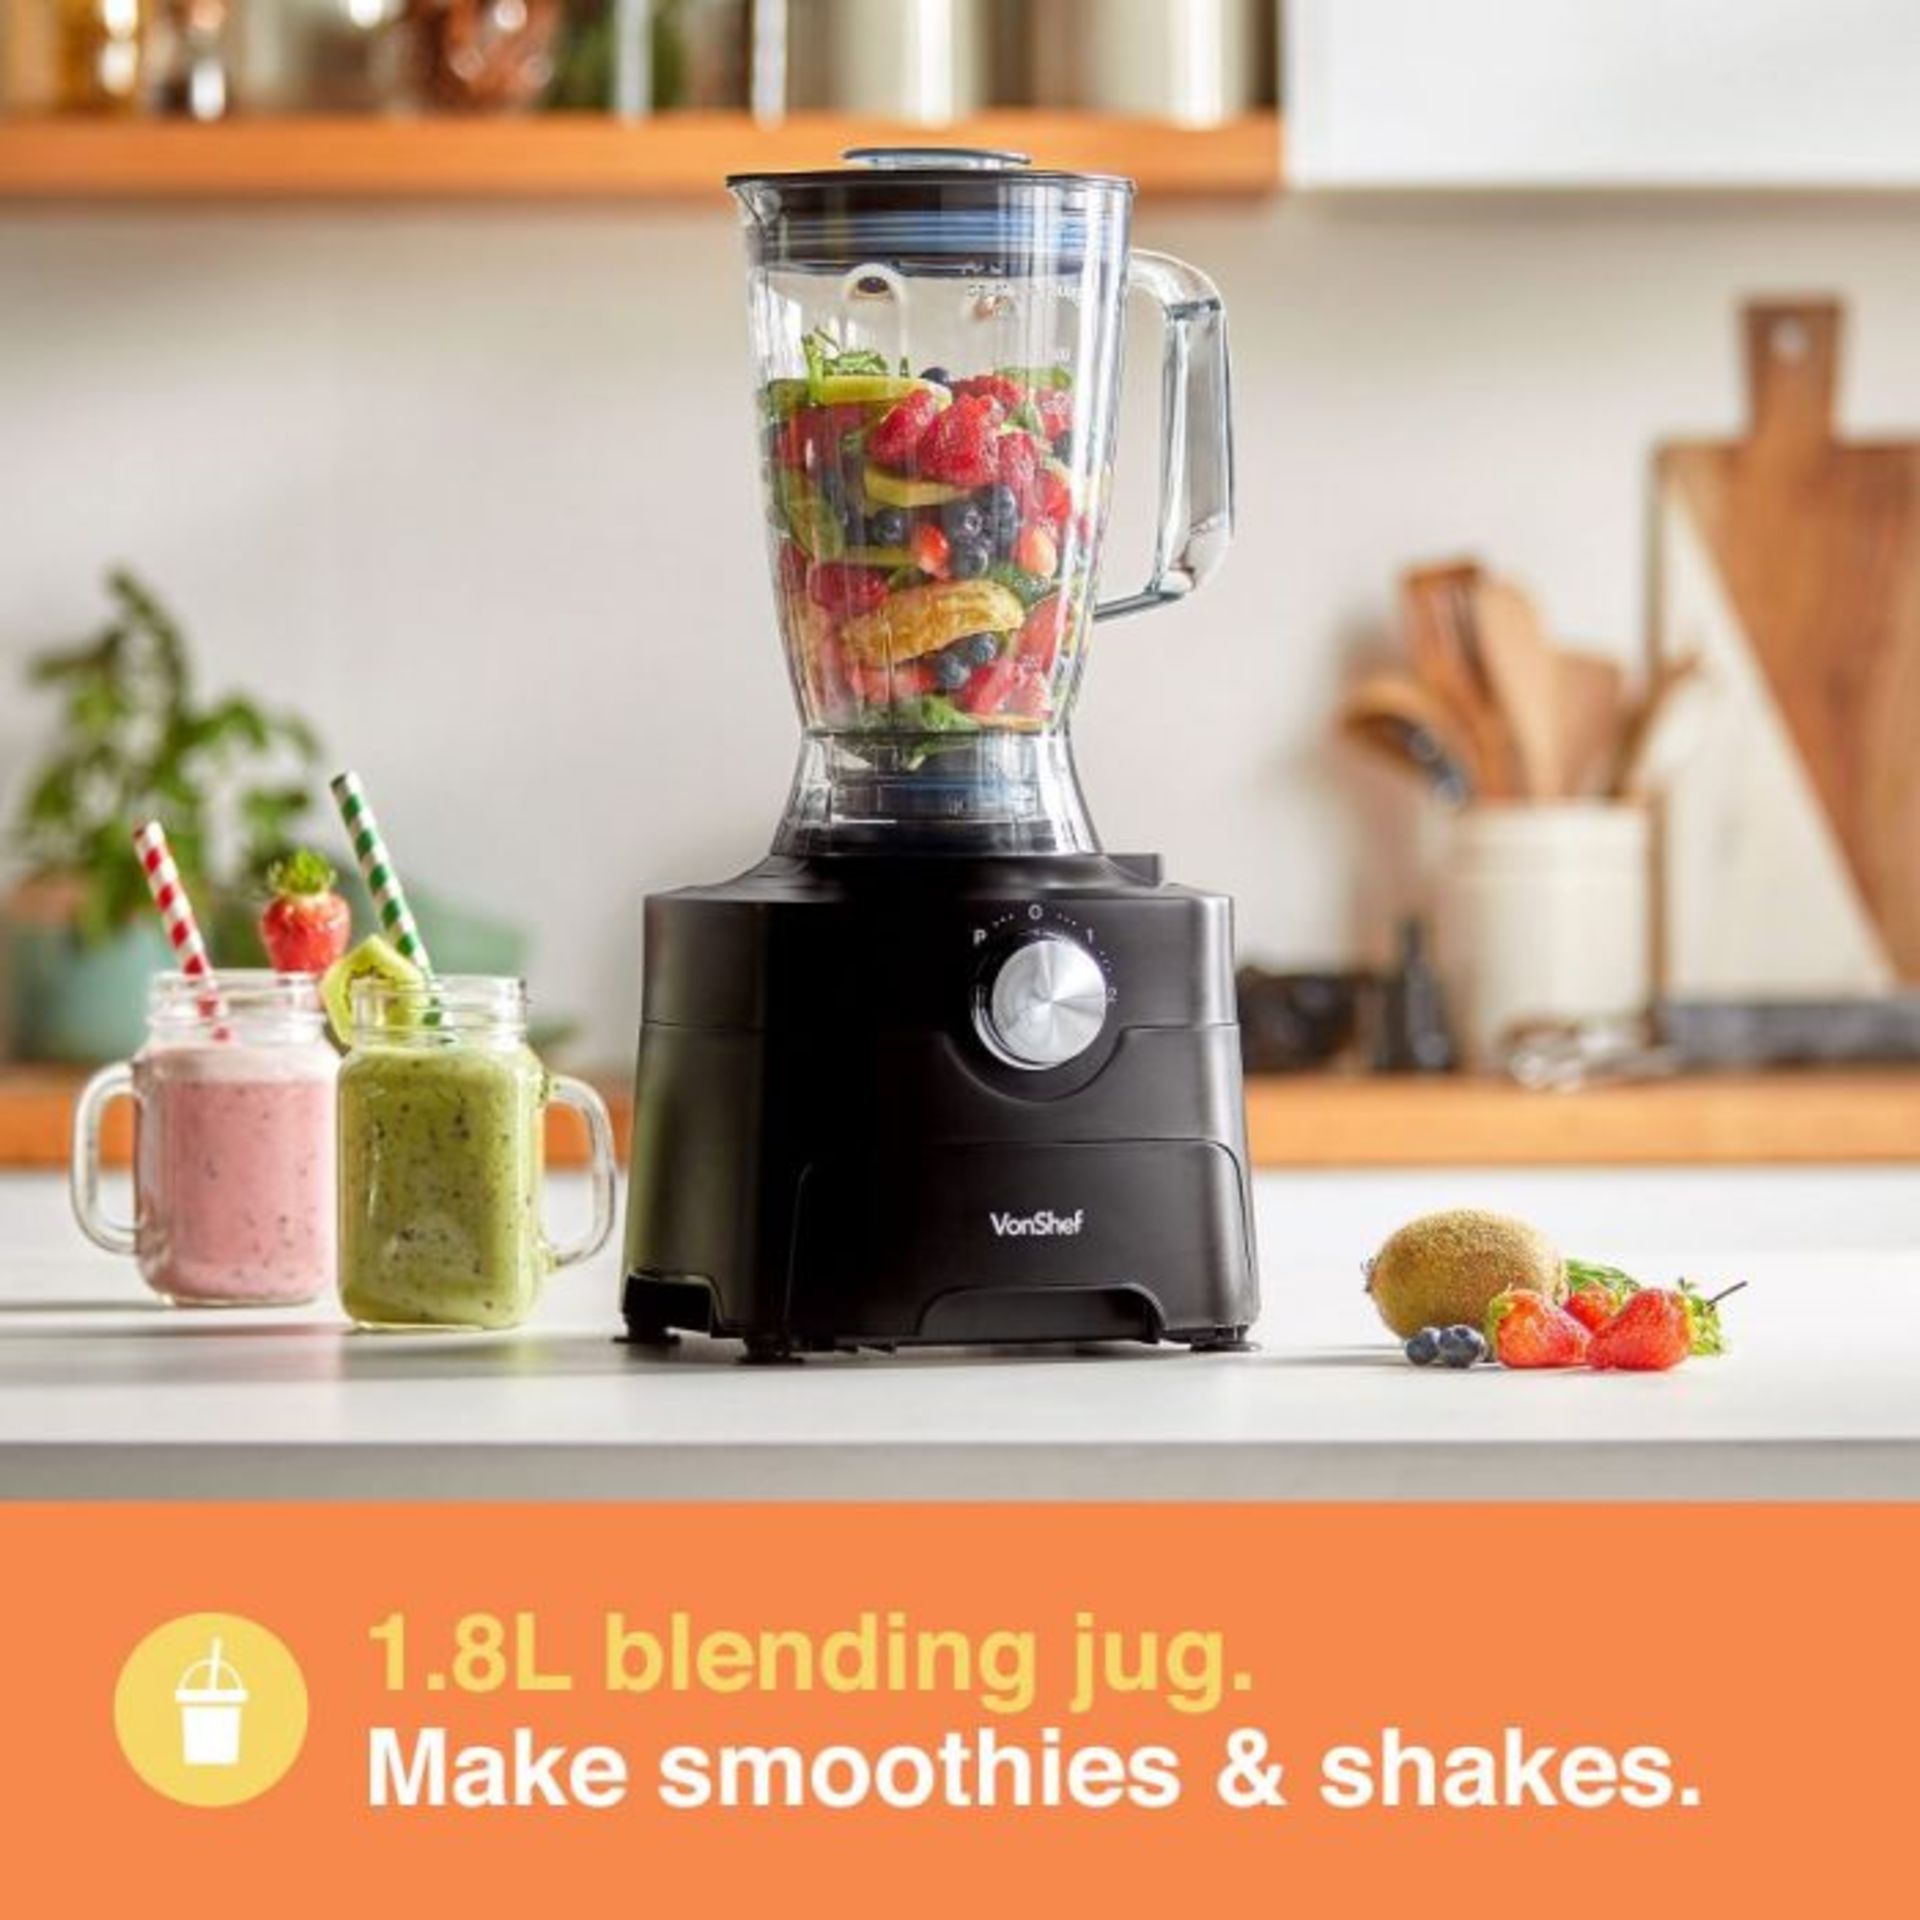 (S57) 1000W Food Processor Chop, blend, mix, purée, grate, shred and knead dough Process big... - Image 4 of 4